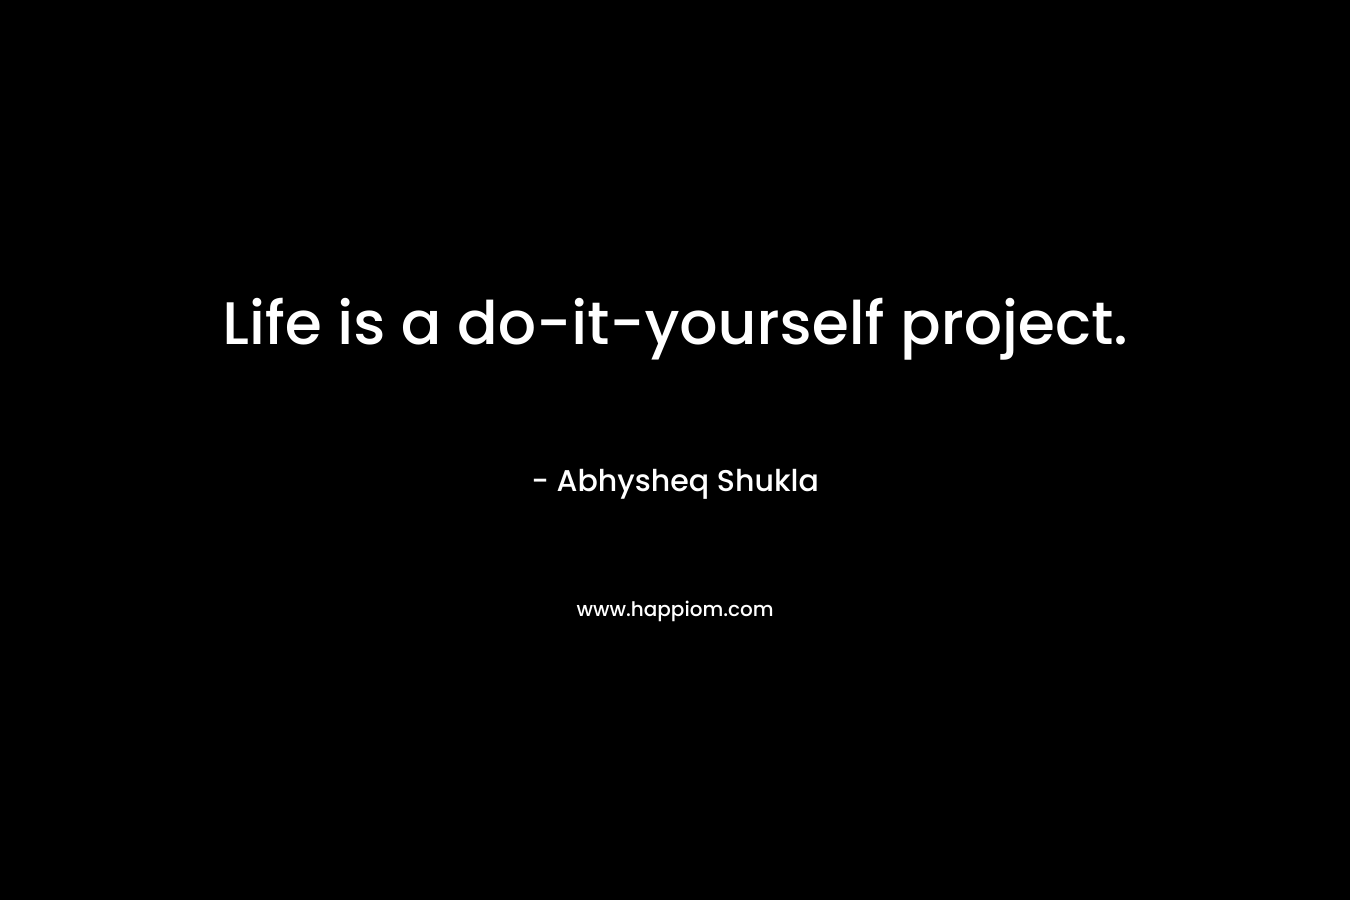 Life is a do-it-yourself project.